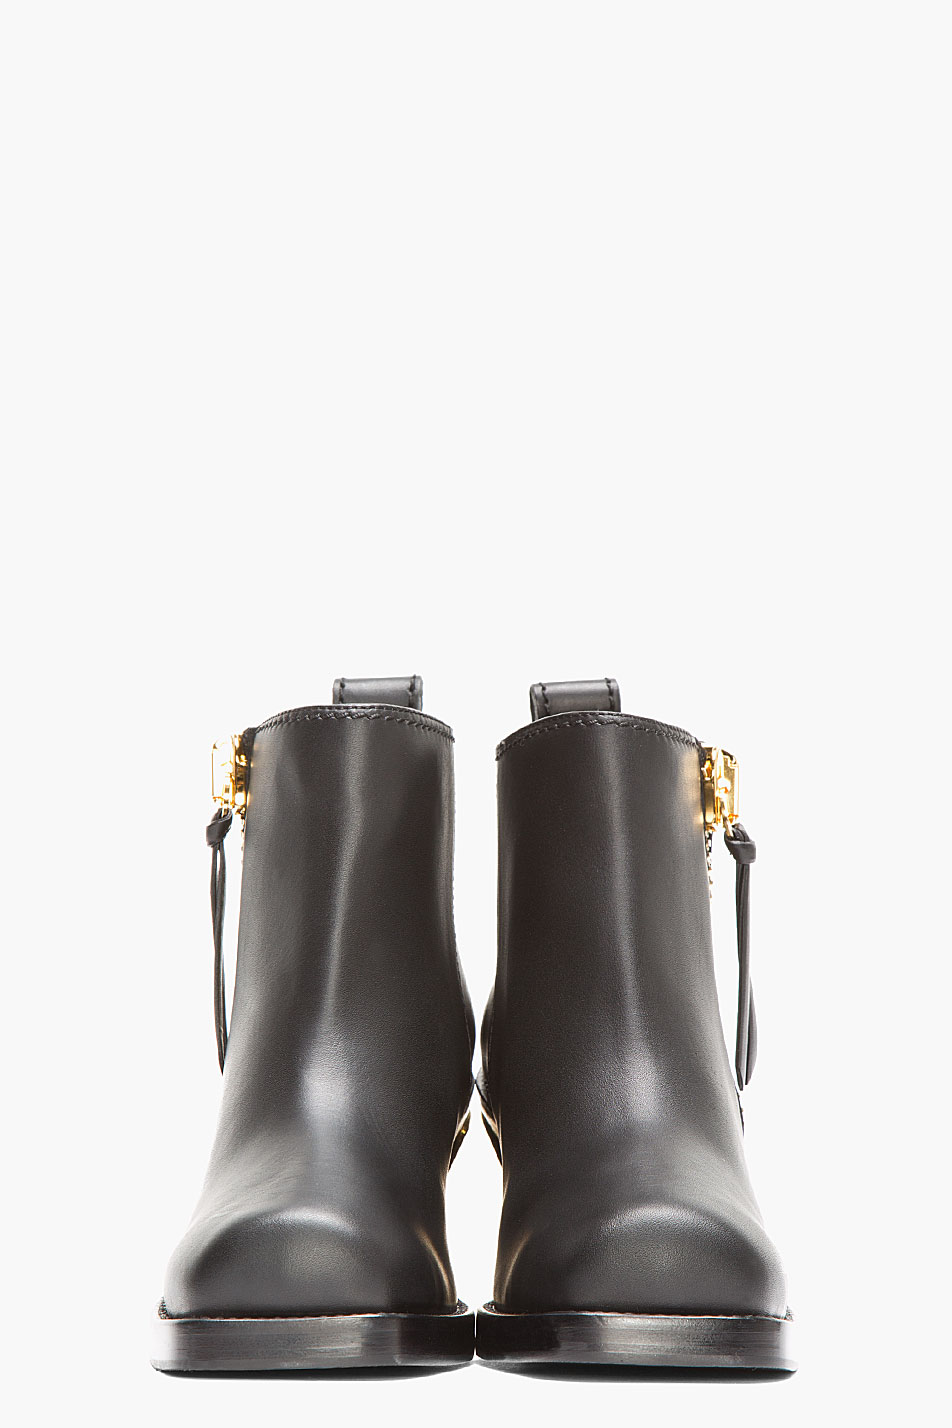 Lyst - Giuseppe zanotti Black Leather Gold_plated Birel Ankle Boots in ...